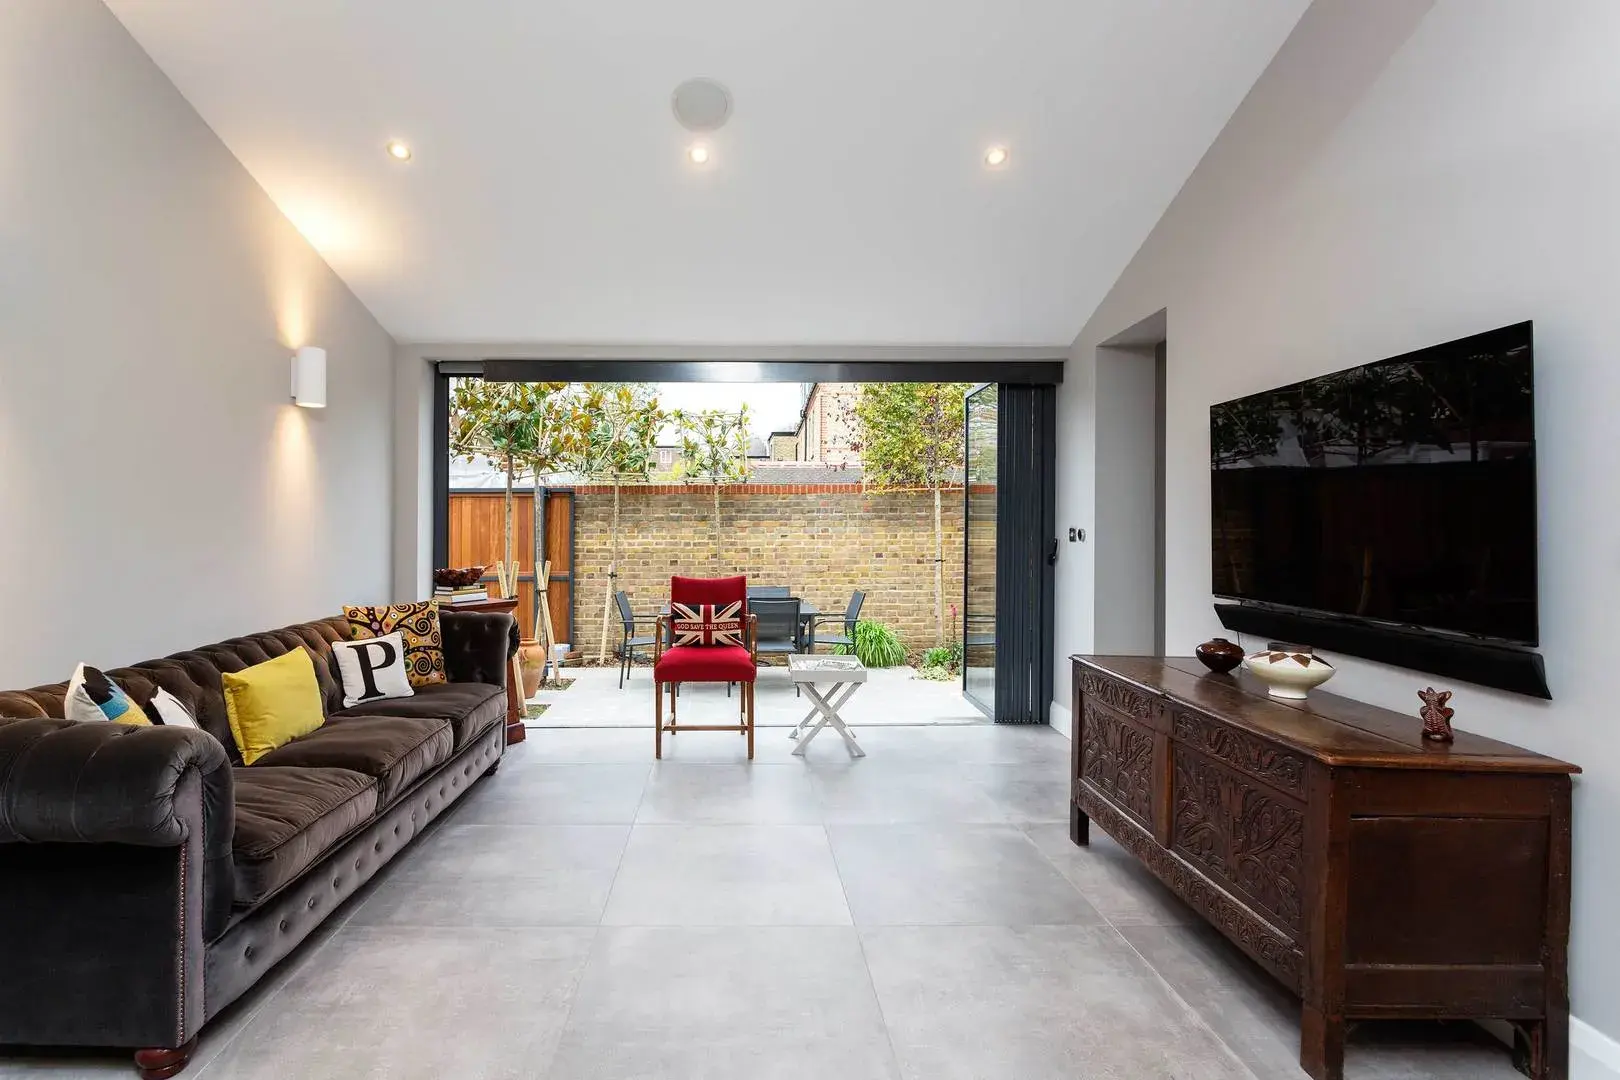 Trinity Road, holiday home in Wimbledon – South London, London